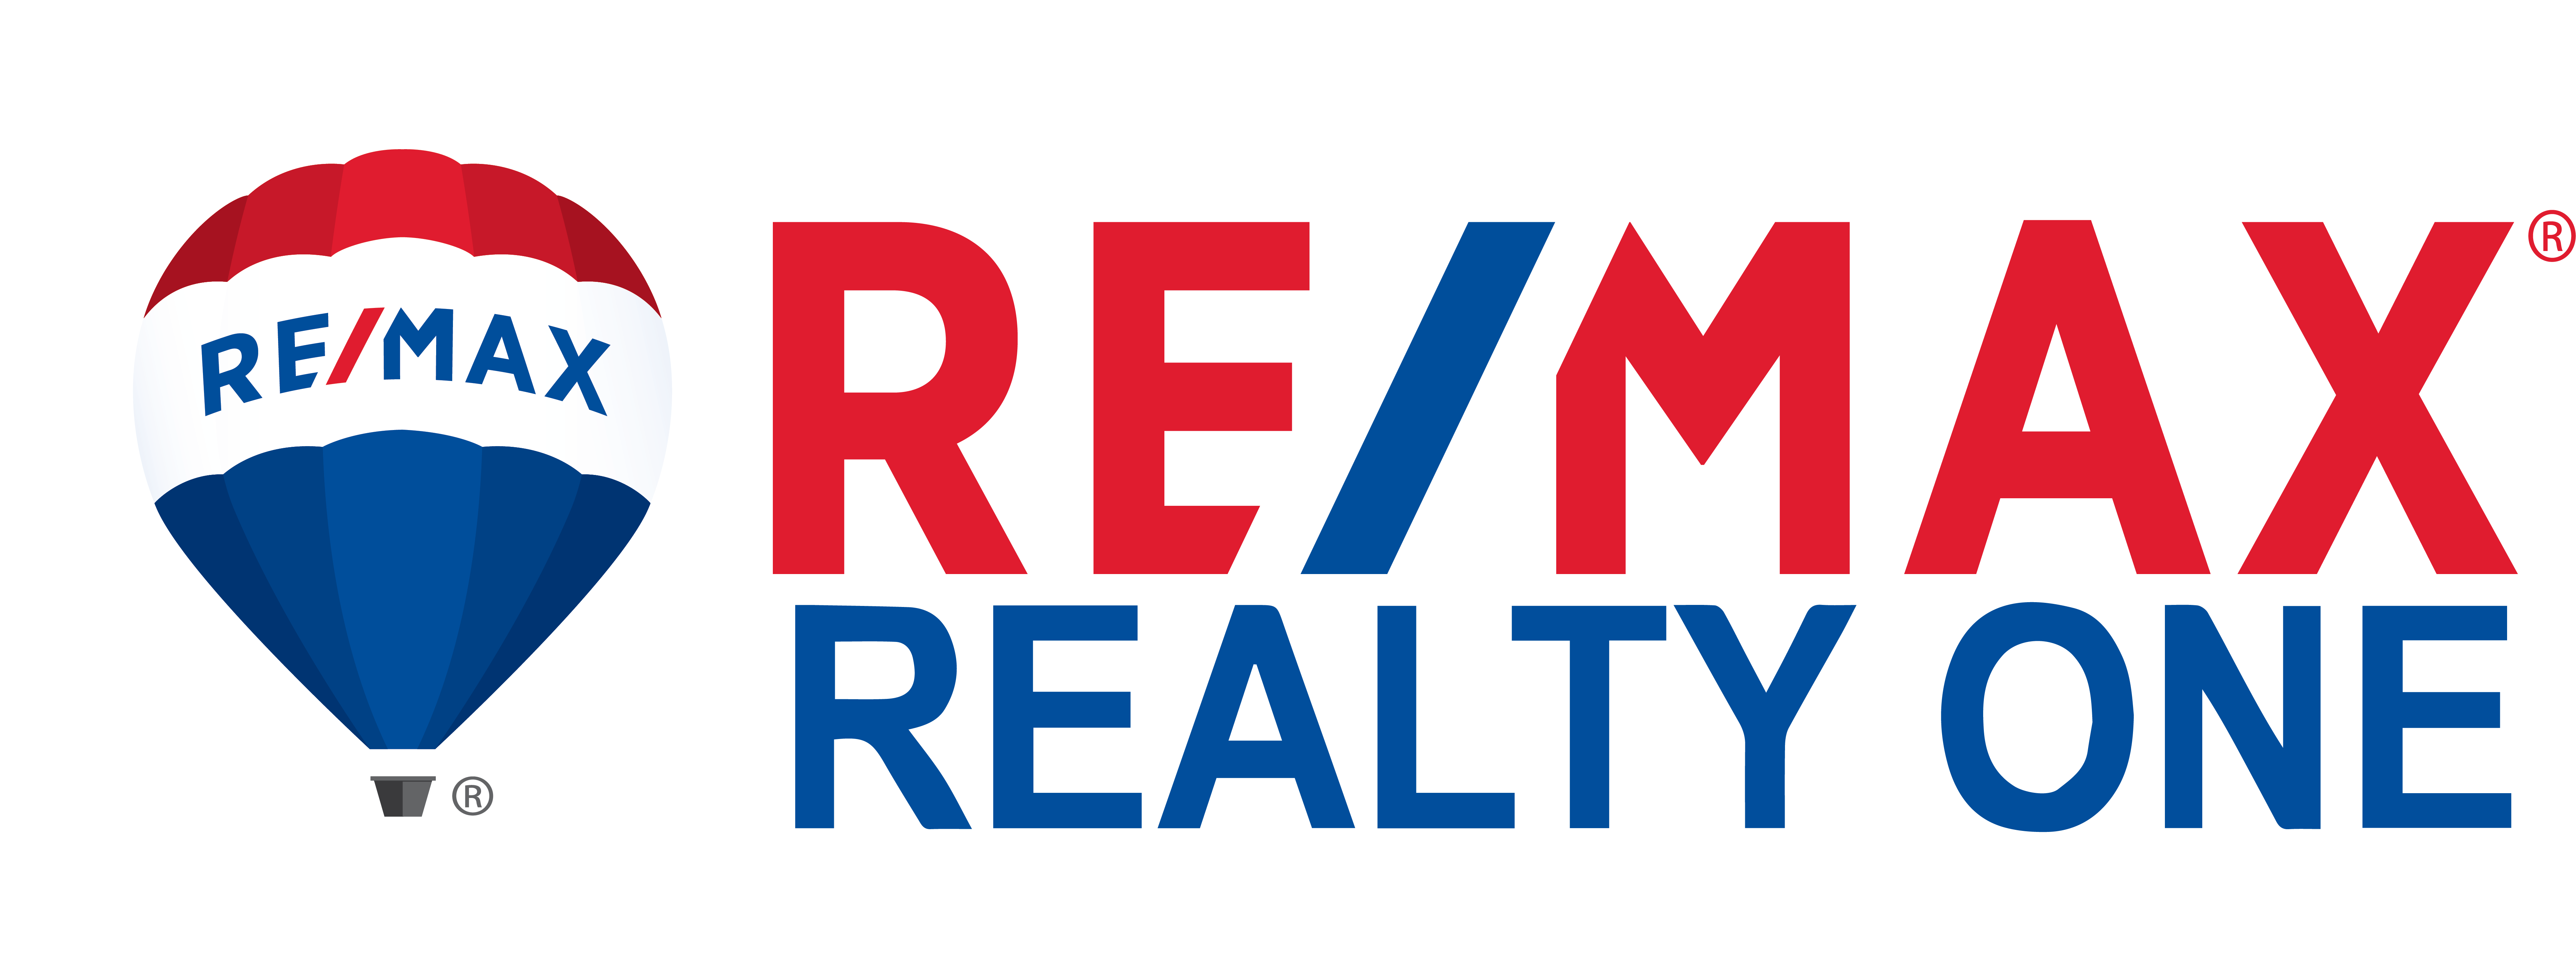 ReMax Realty One